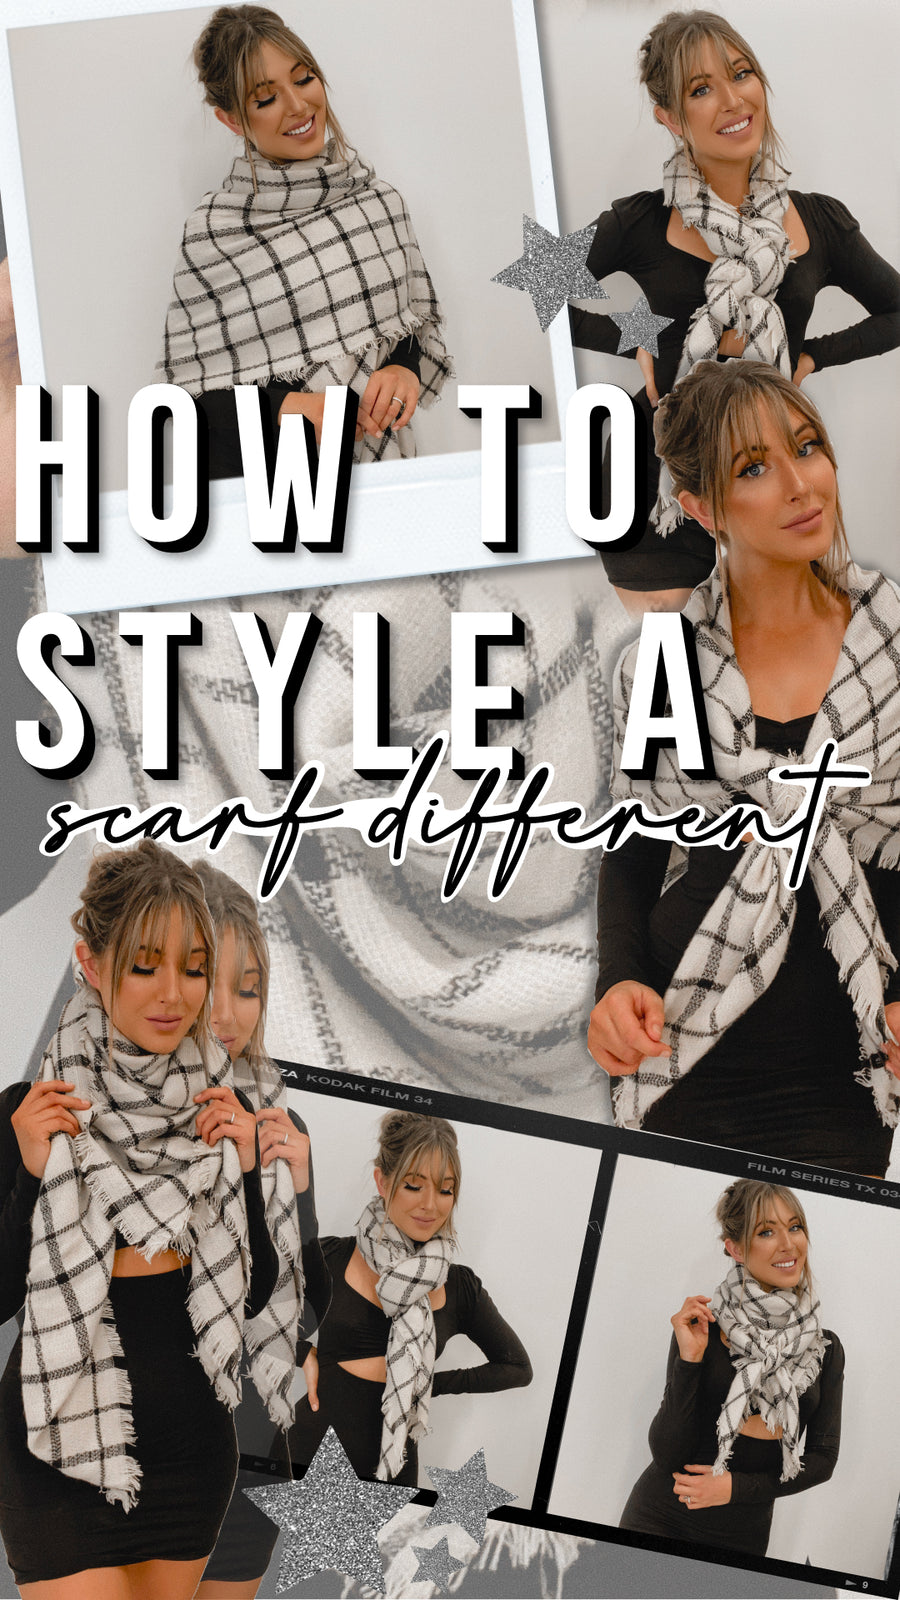 How to style a scarf different